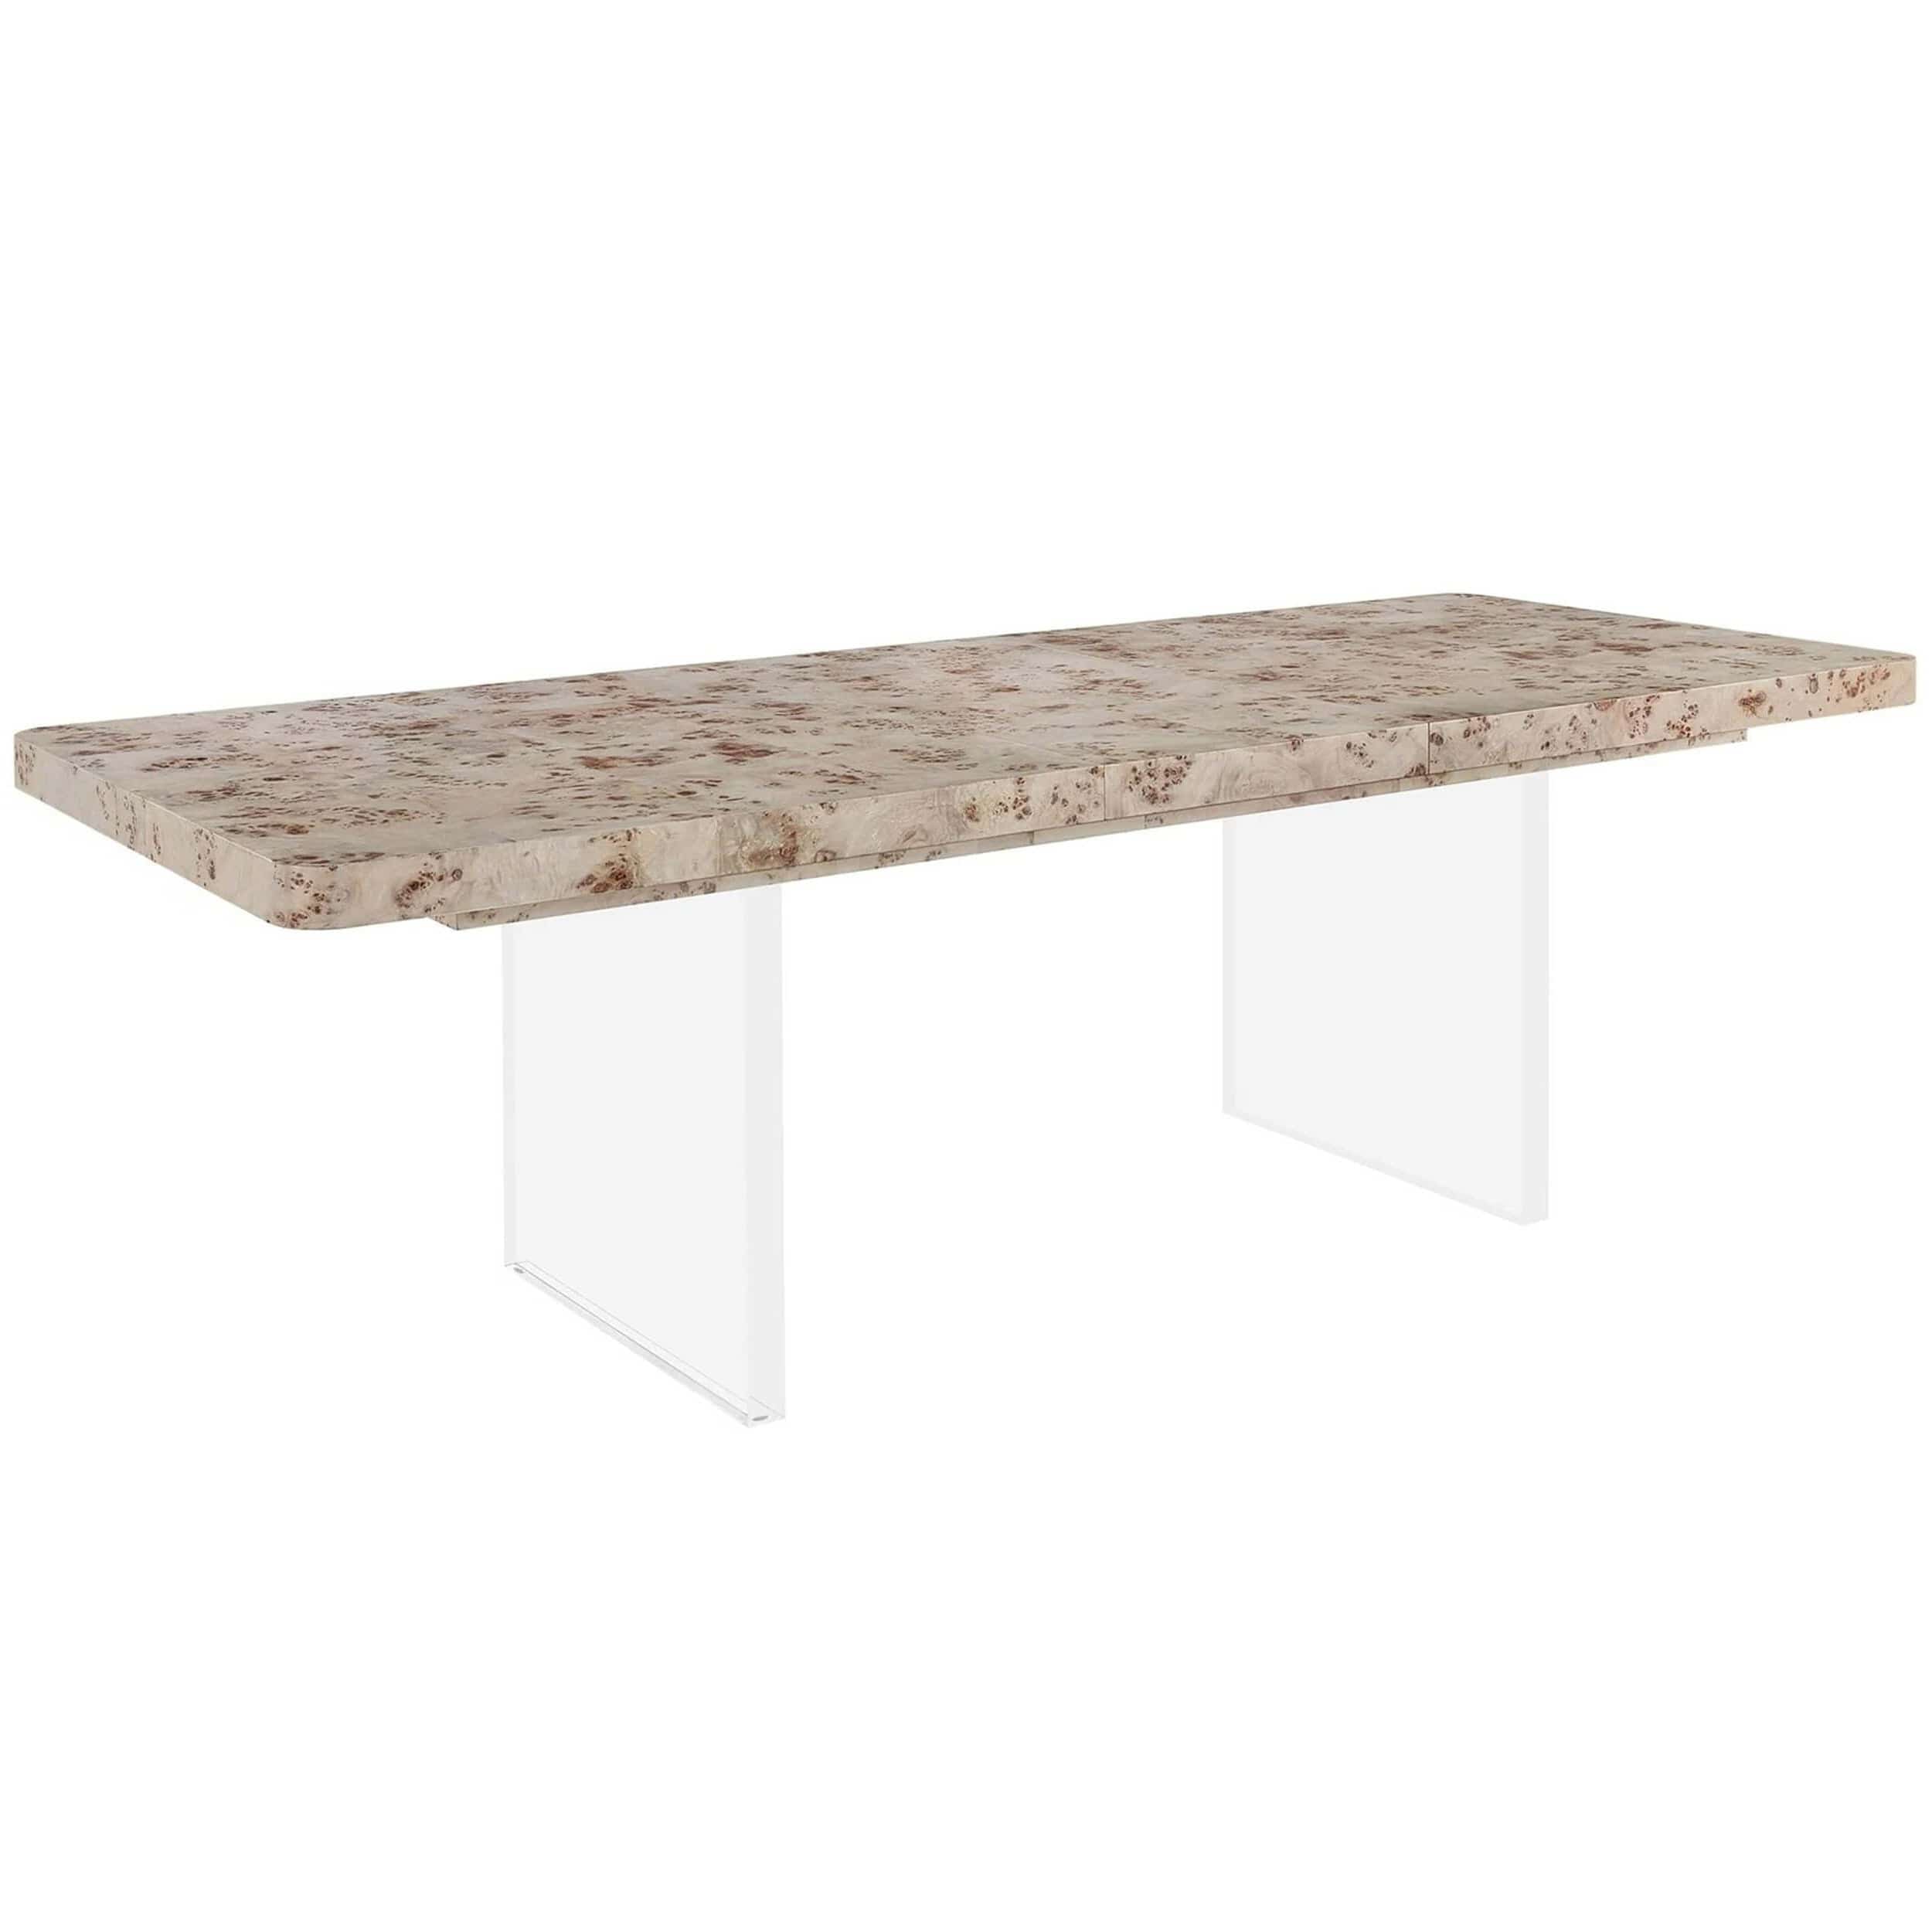 Image of Tranquility Rectangular Dining Table